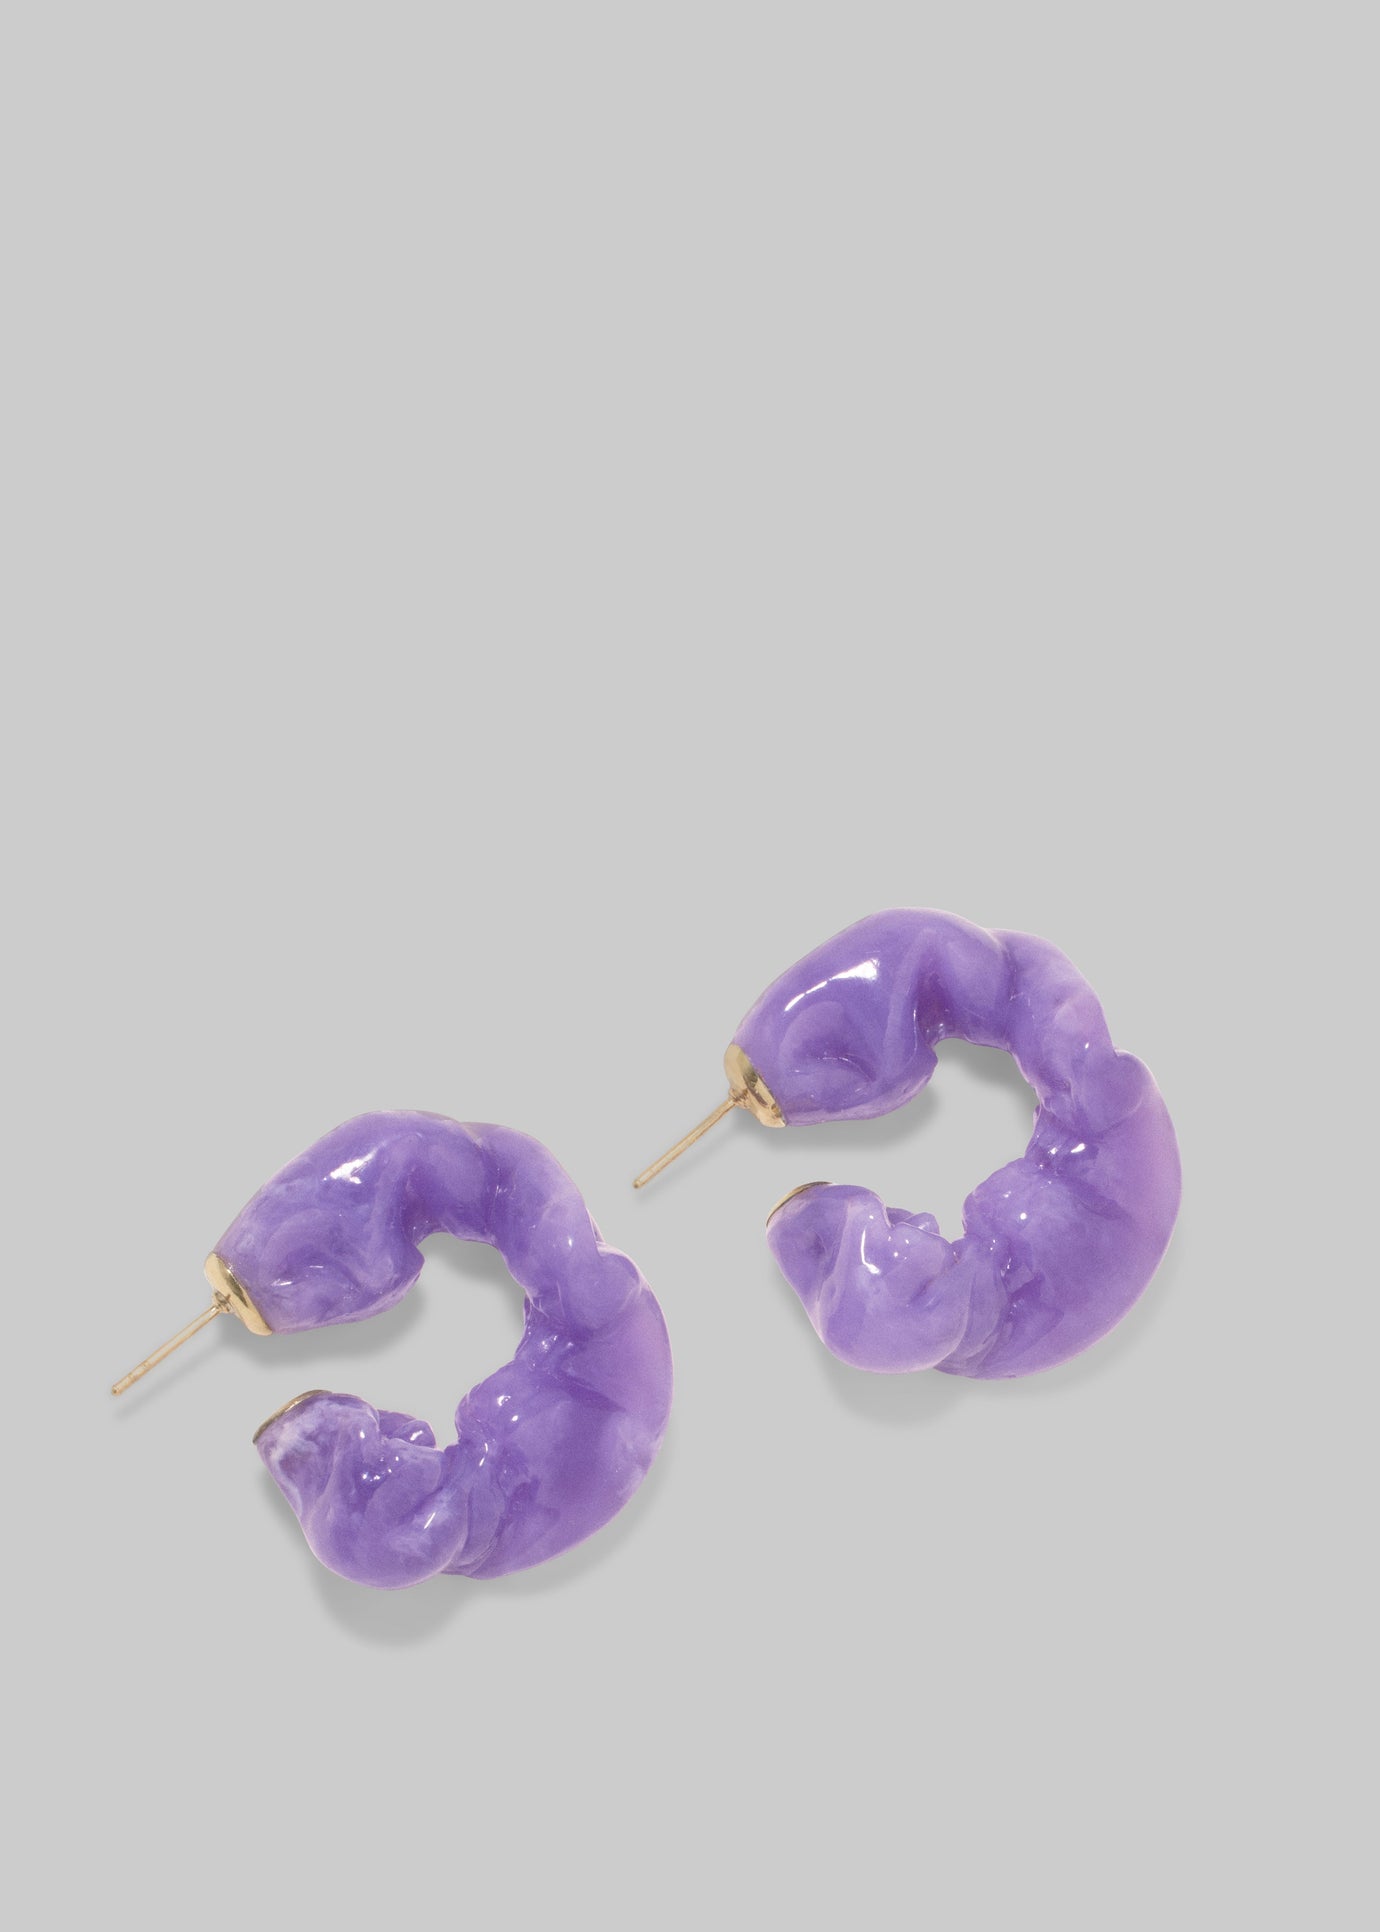 Completedworks Ruffle Bio-Resin Earrings - Lilac